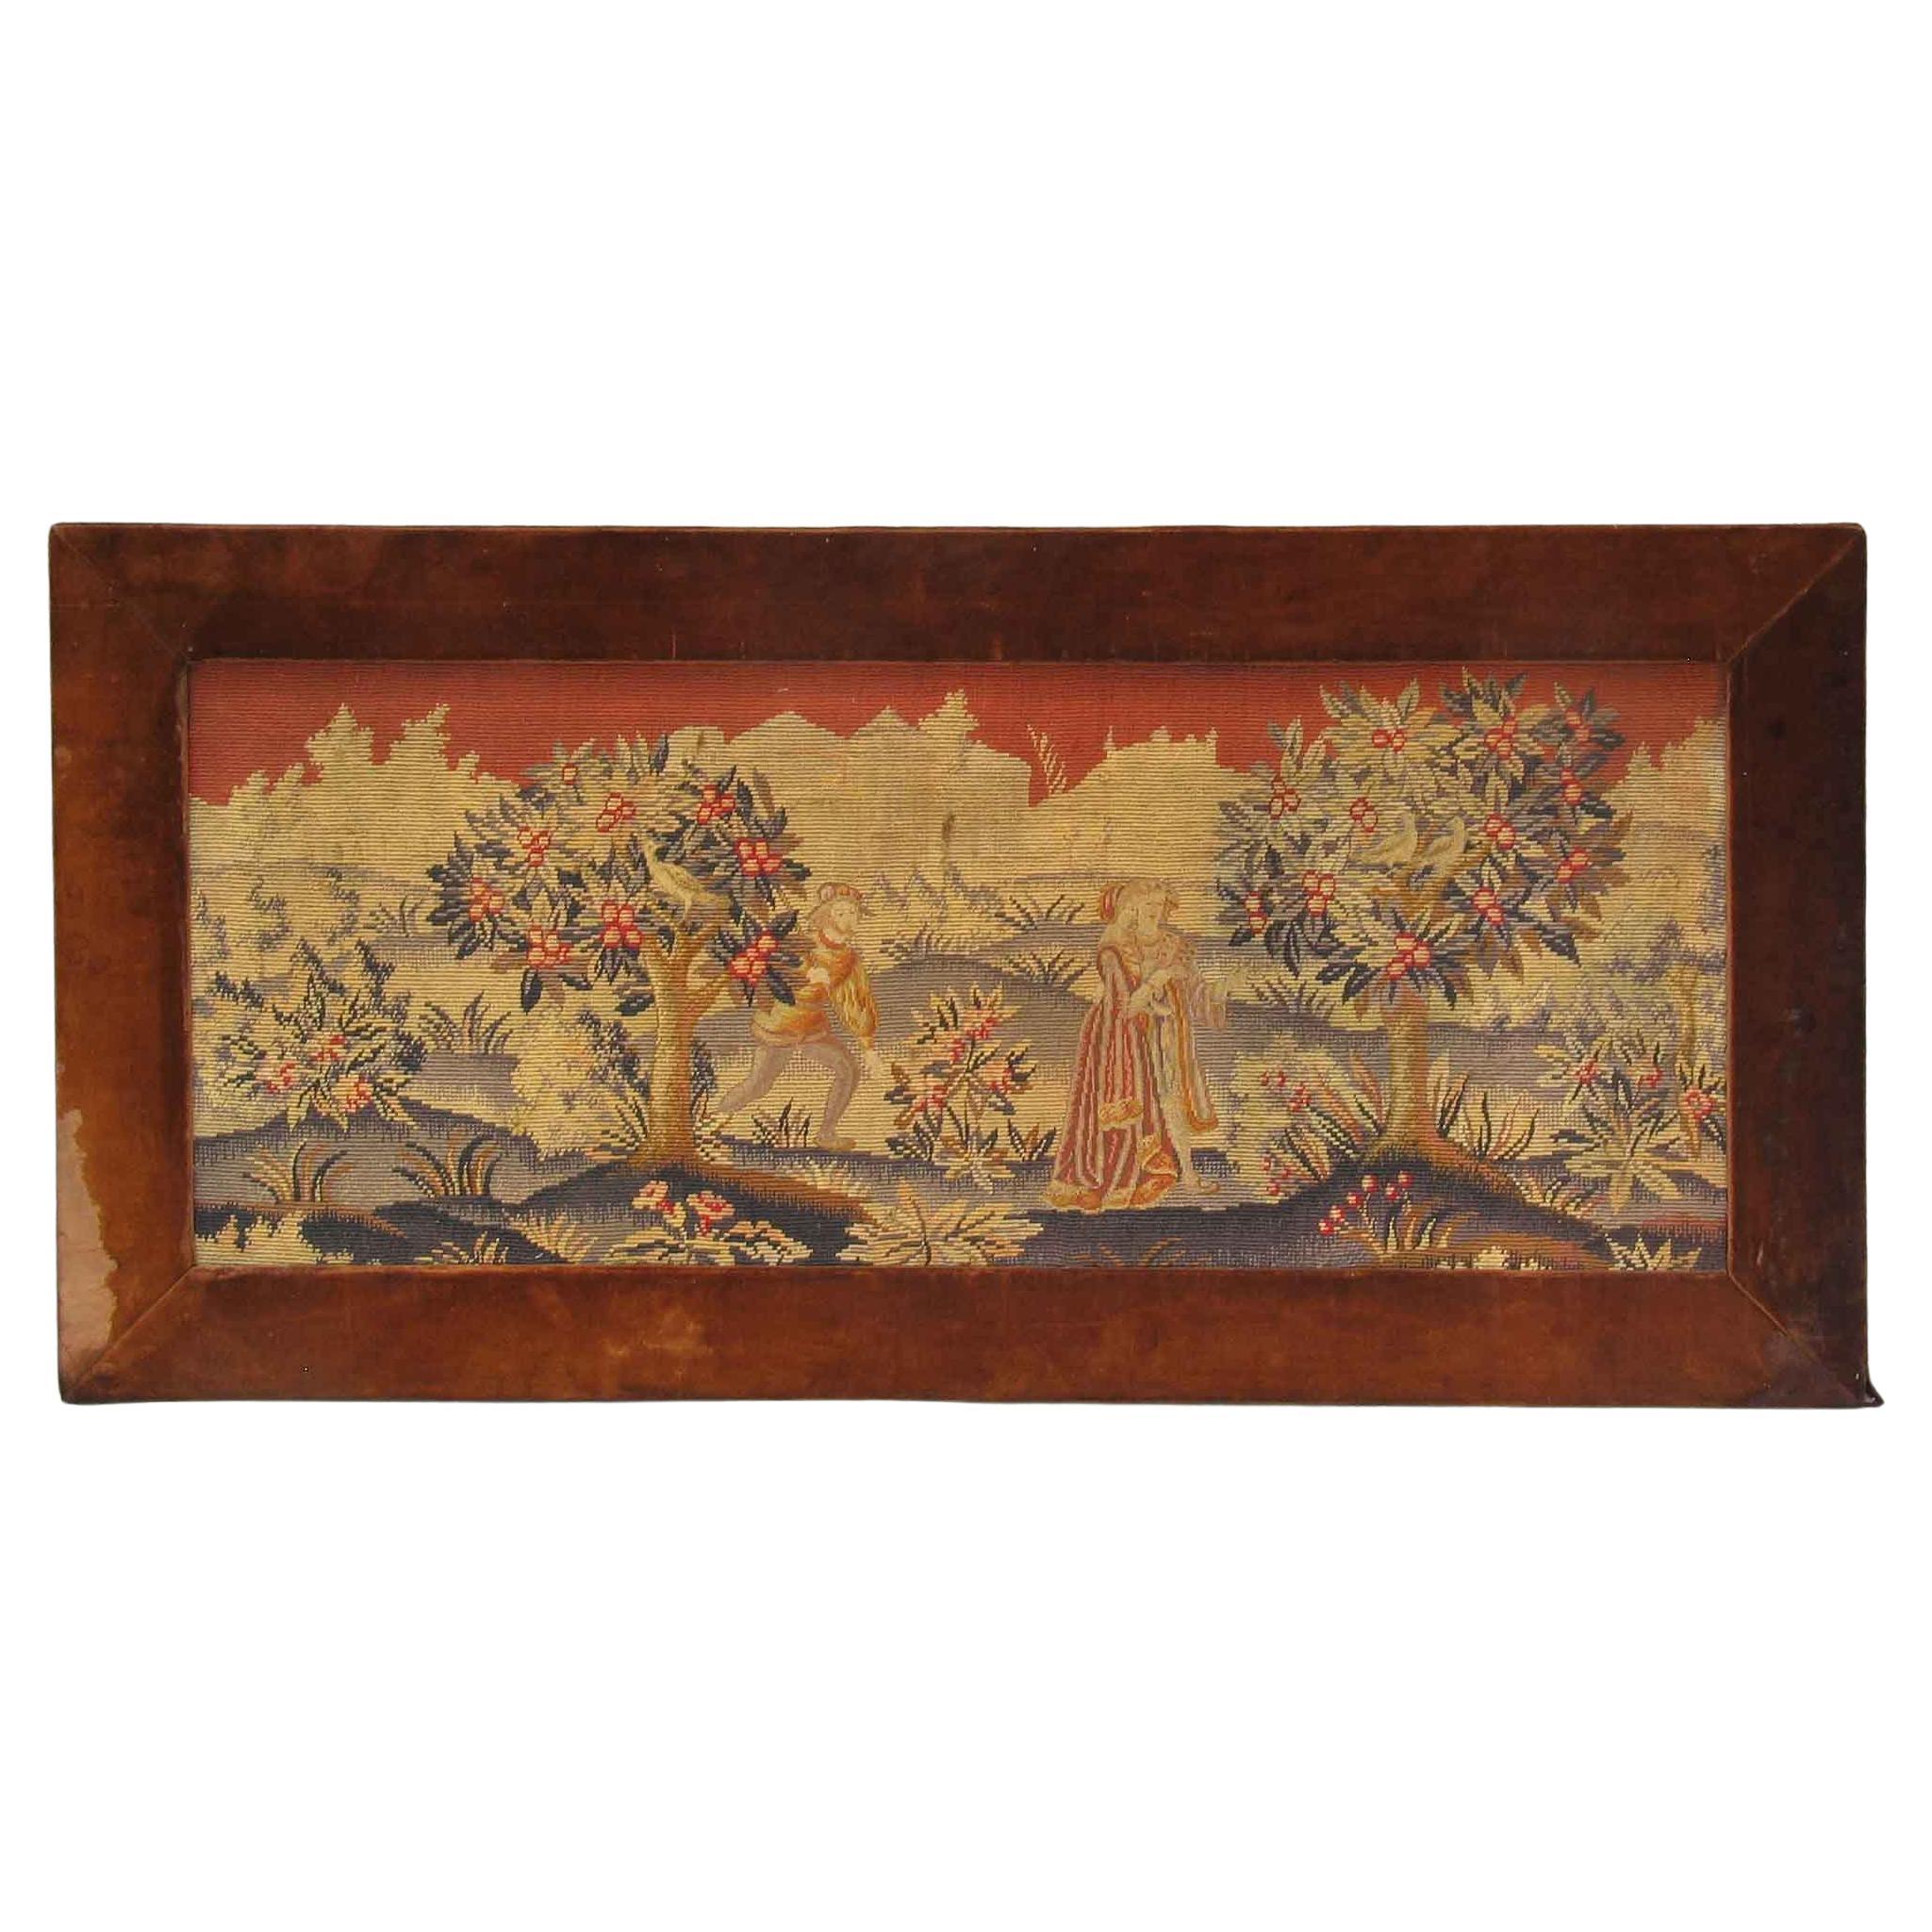 18th Century Gold-Threaded Needlework Picture at 1stDibs